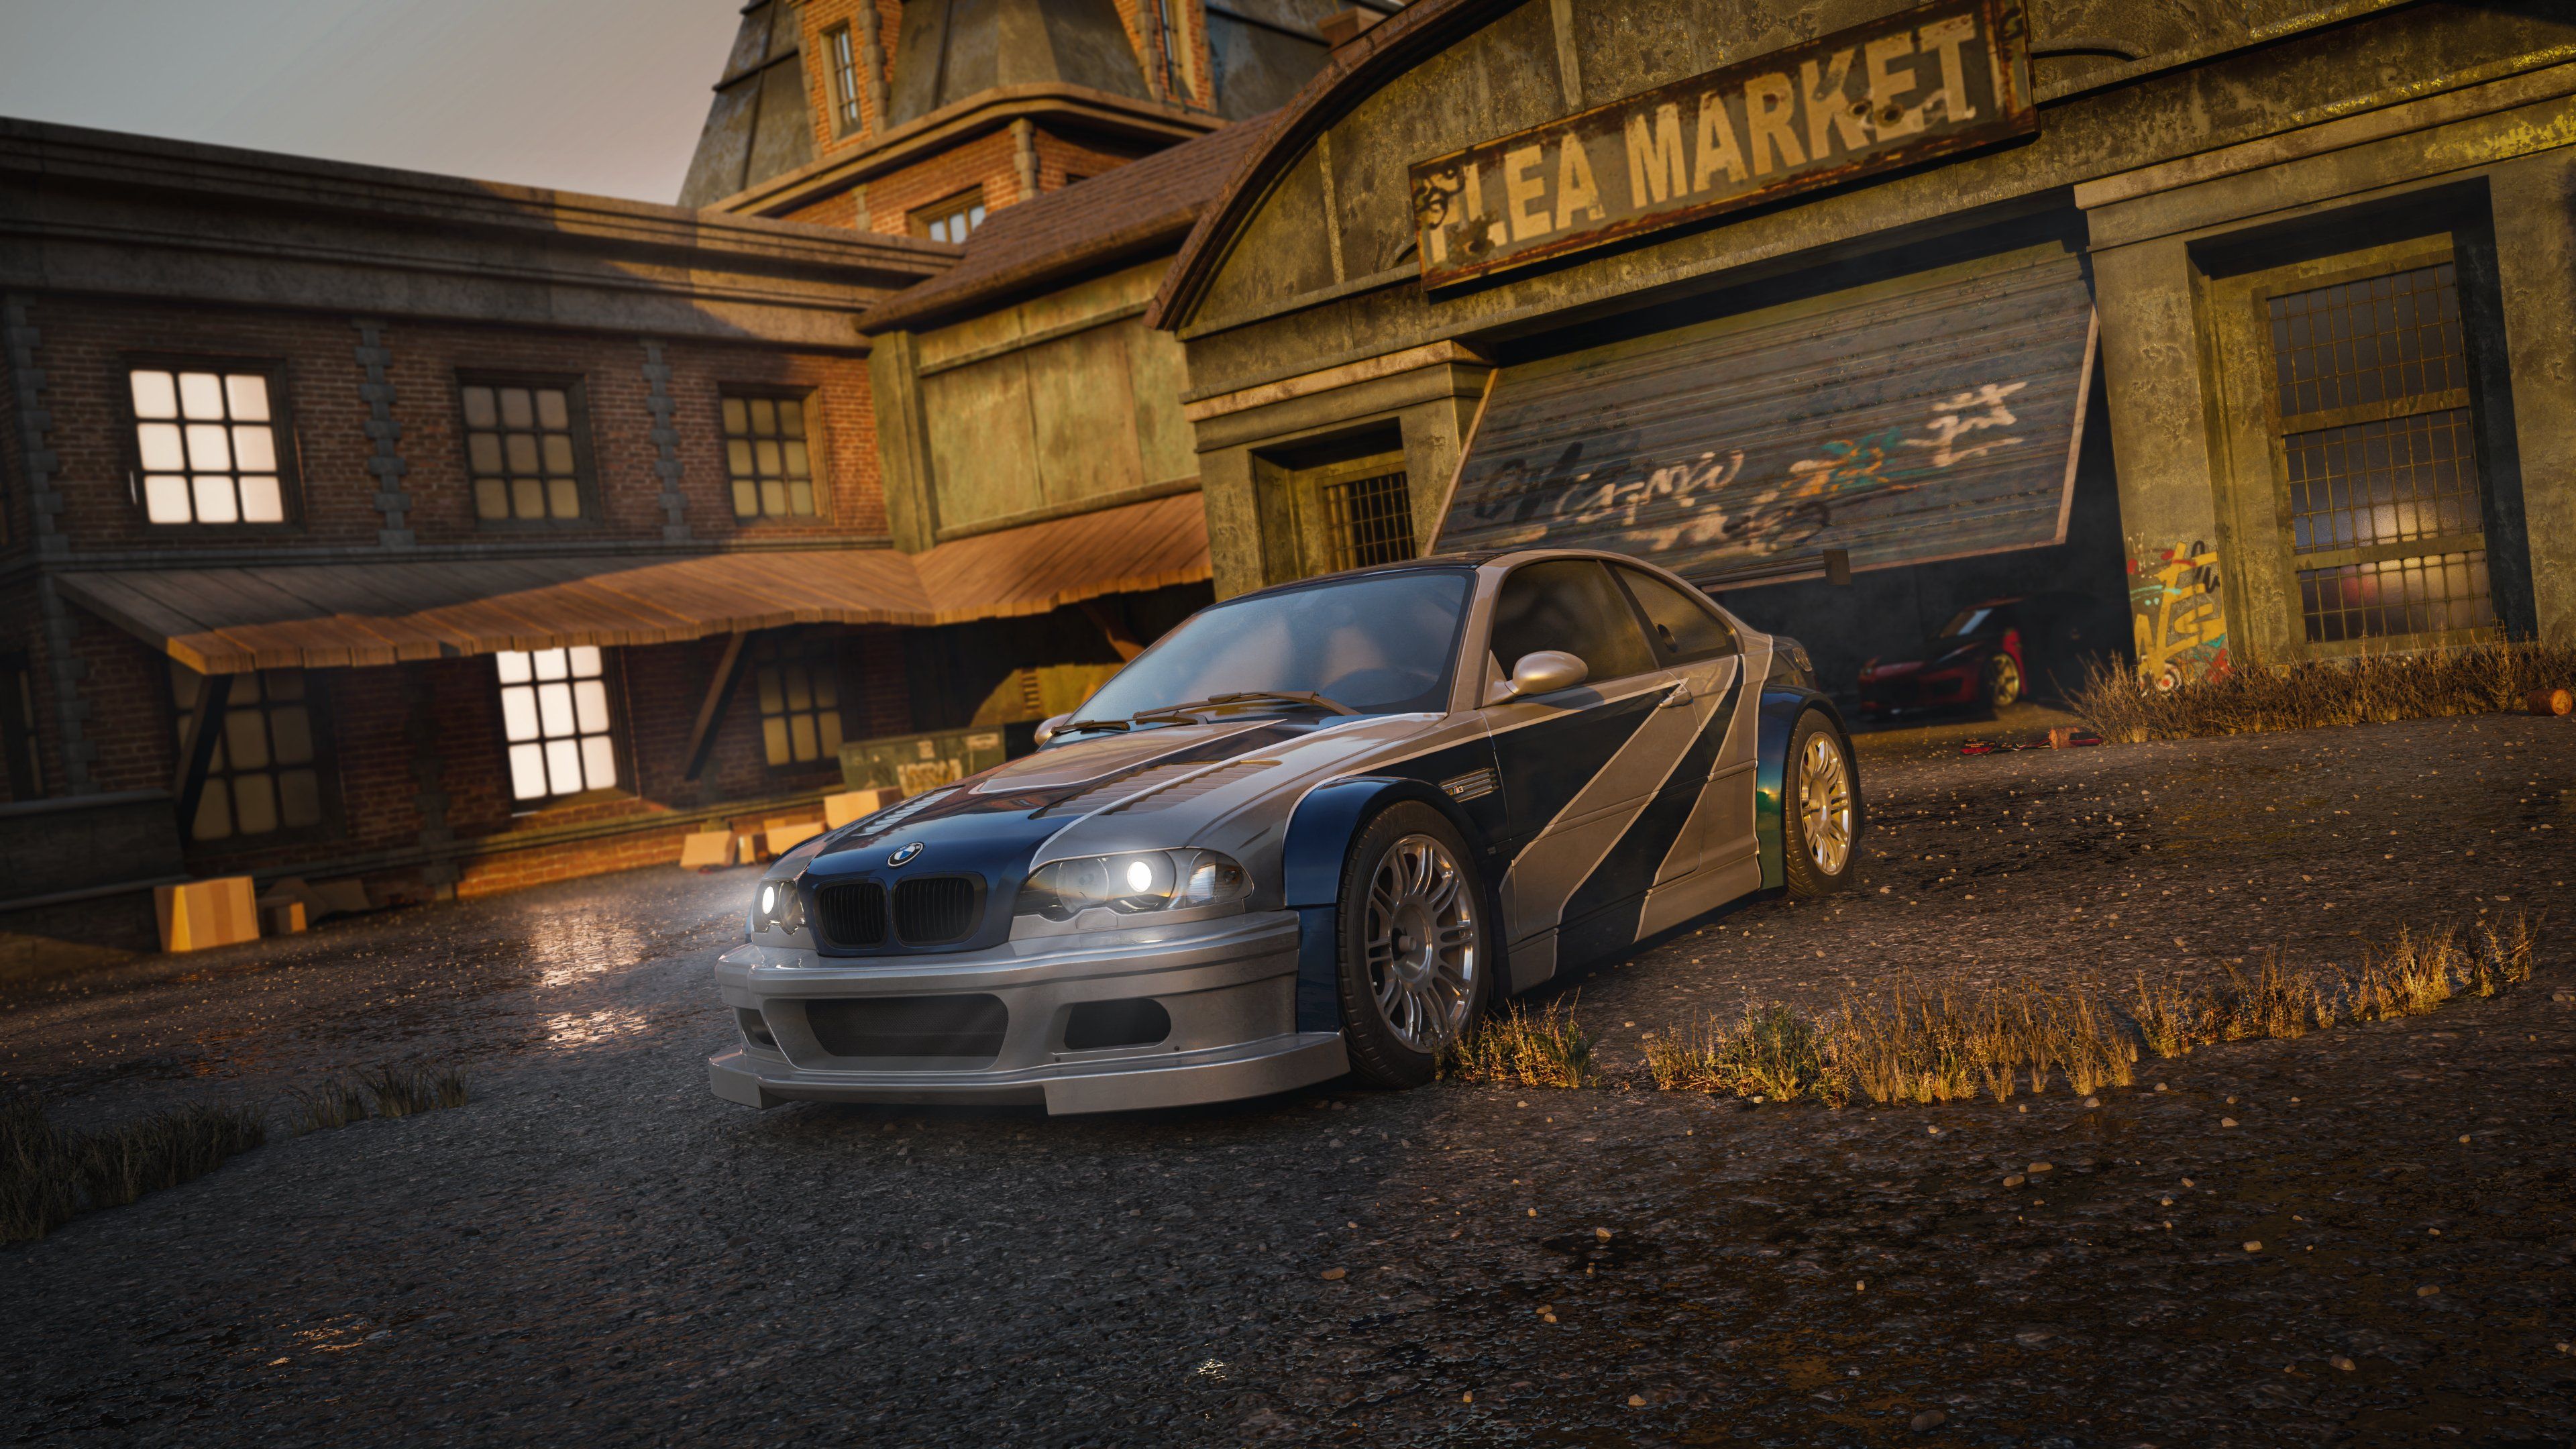 NFS - Need for Speed Most Wanted remake